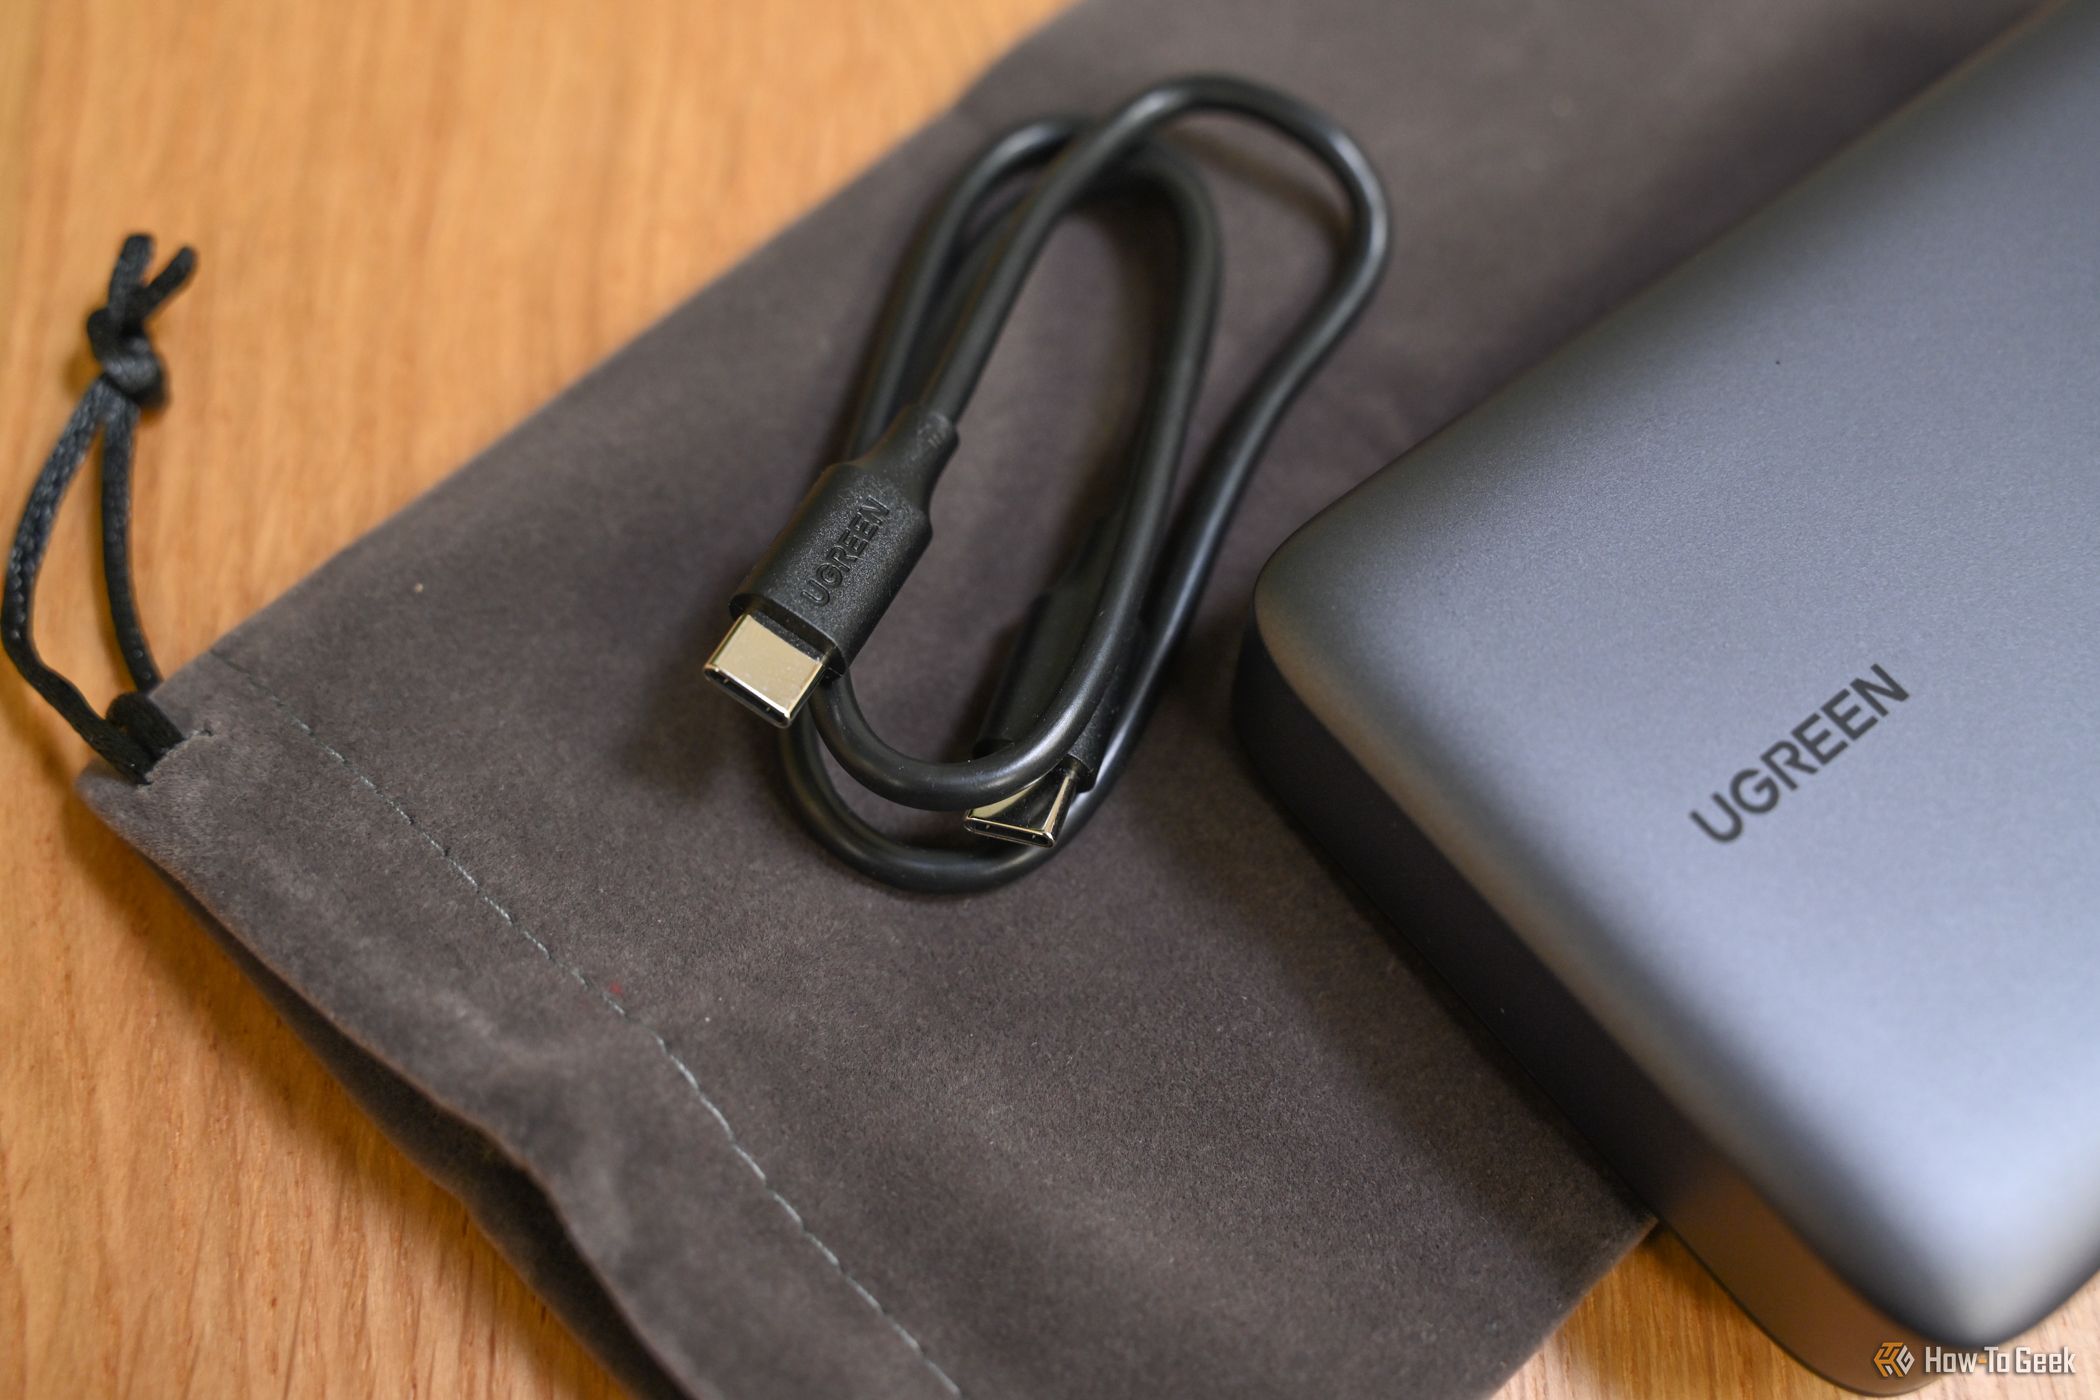 The UGREEN Nexode 100W 20,000mAh is the Only Power Bank You Will Need